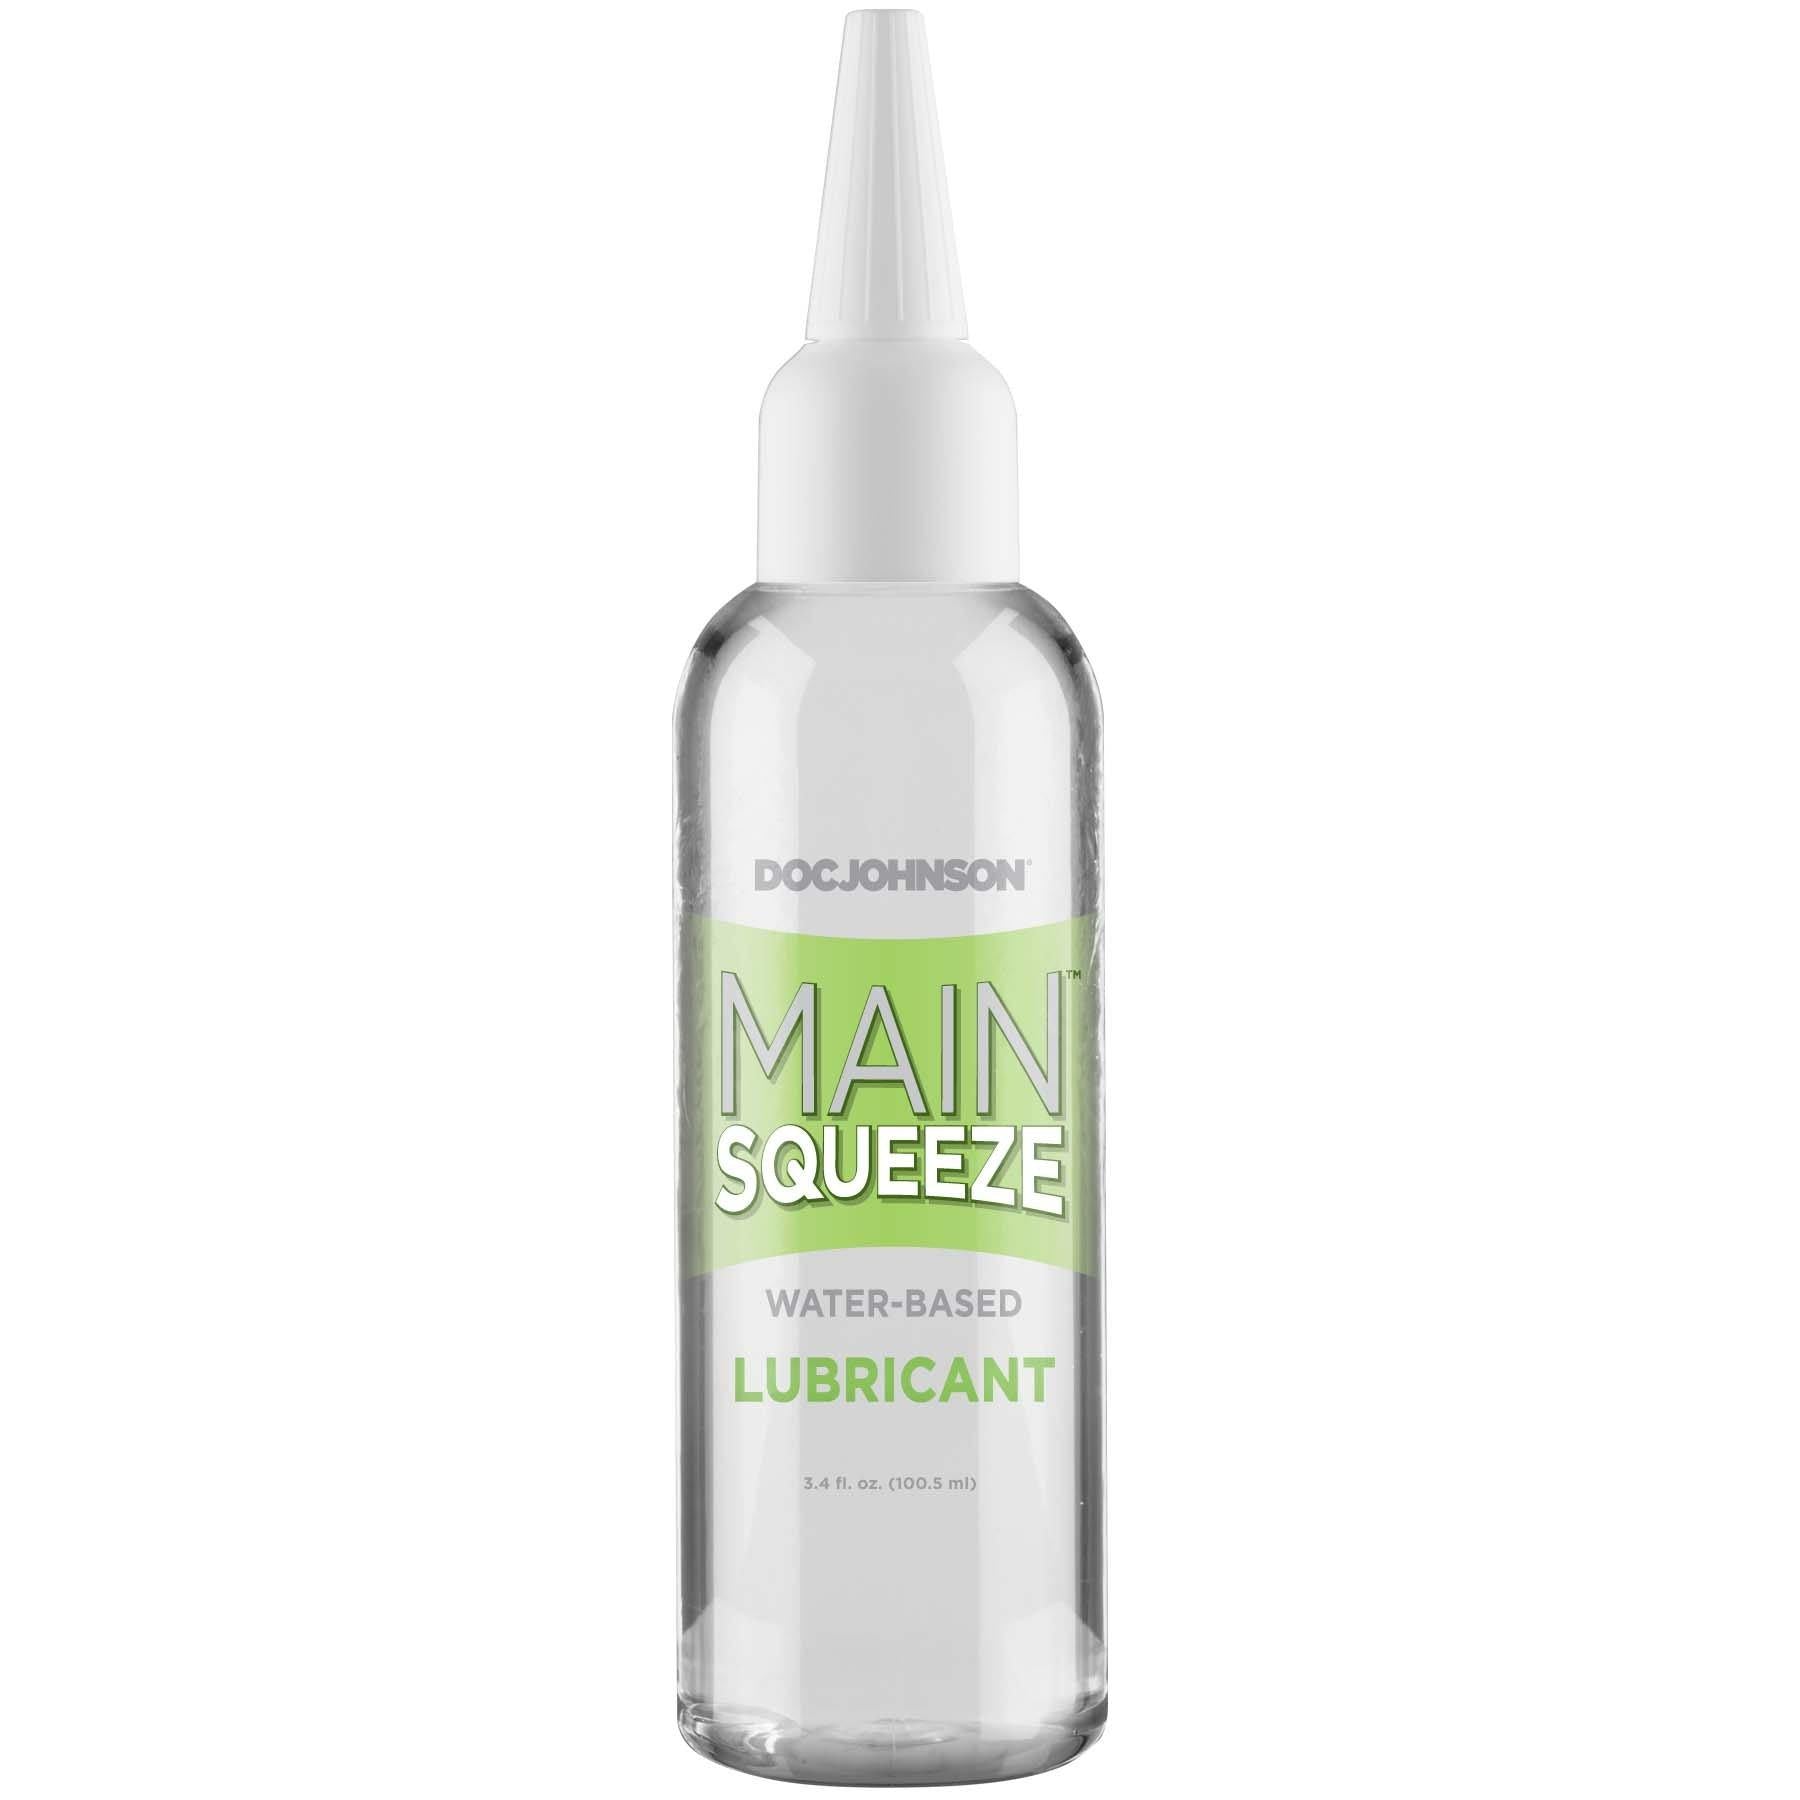 Doc Johnson Main Squeeze Water Based Lube 3.4Oz - Buy At Luxury Toy X - Free 3-Day Shipping